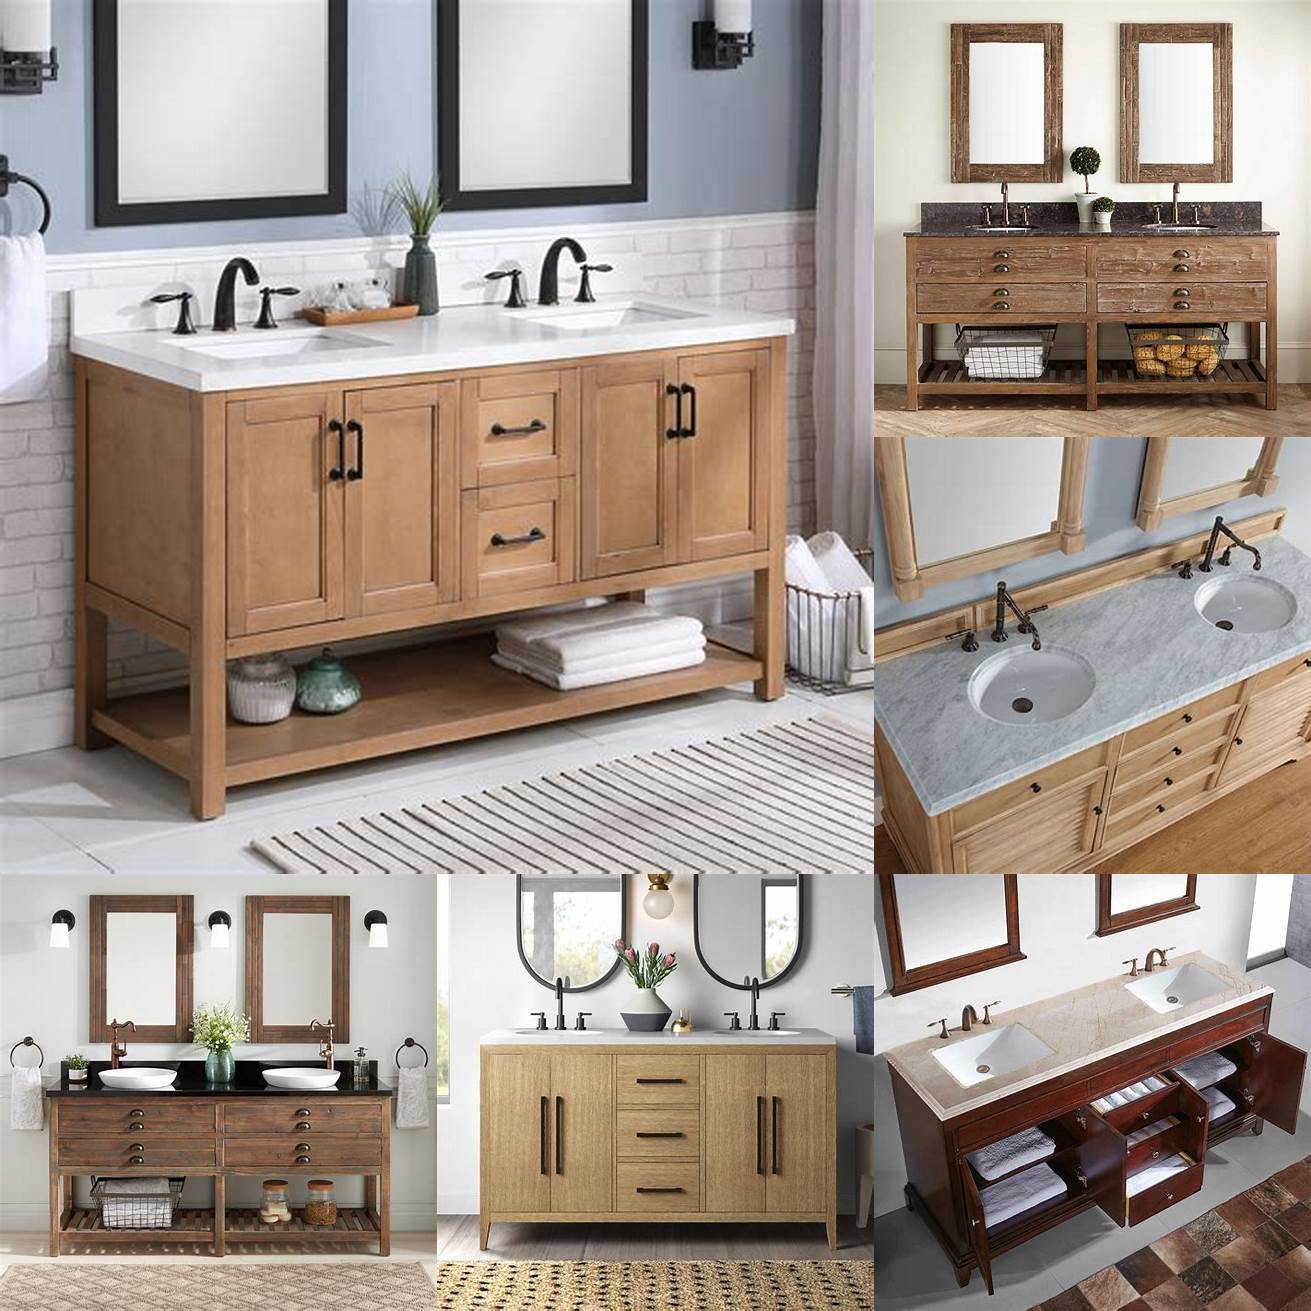 Double sink bathroom vanity with wooden finish